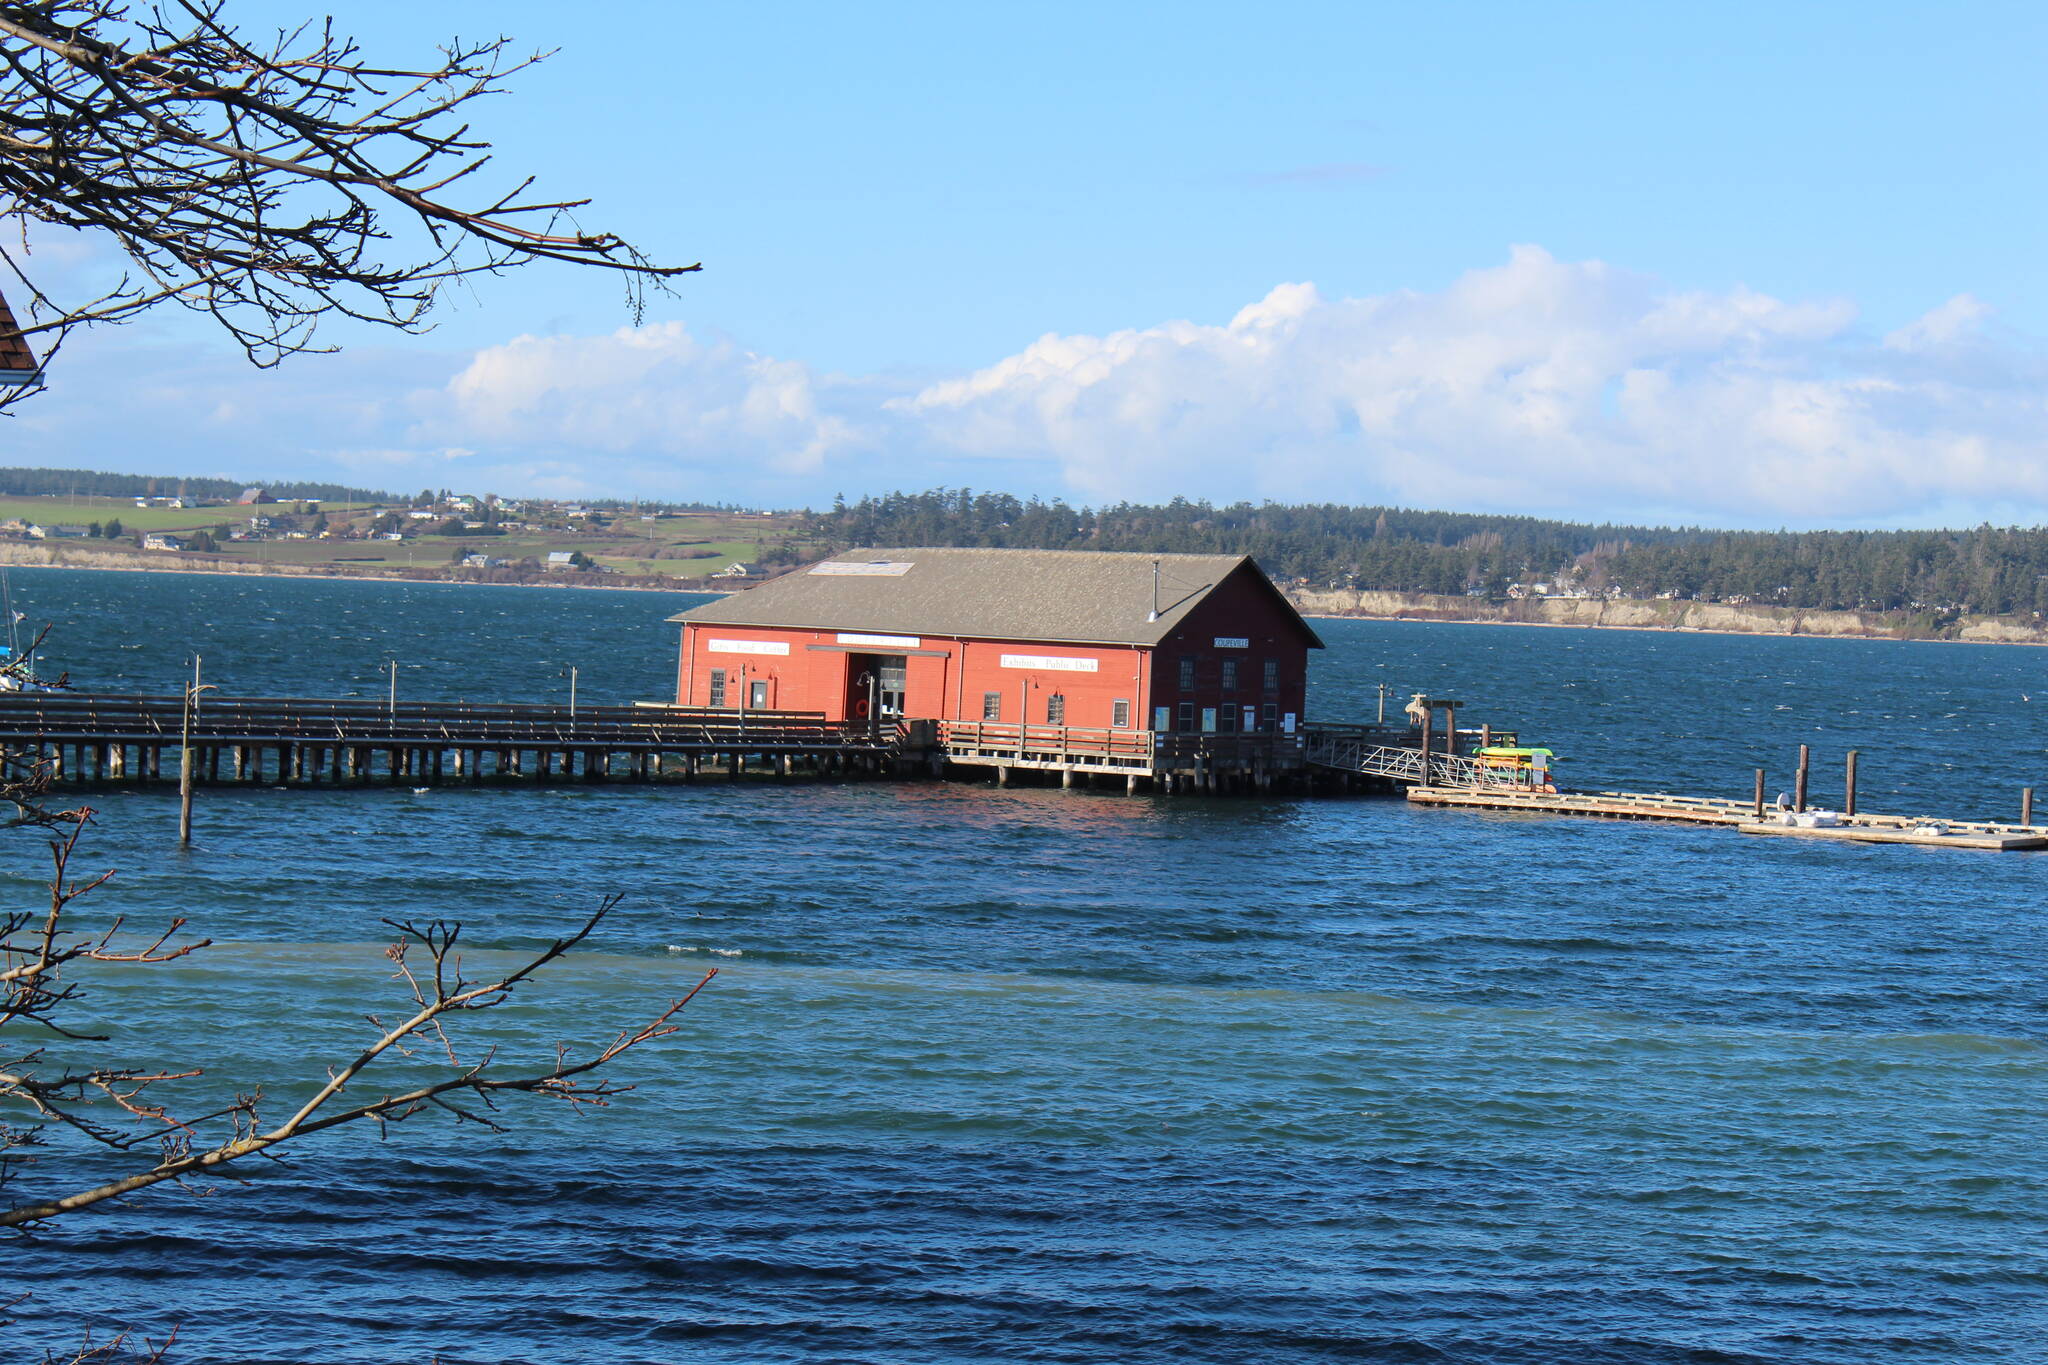 File photo by Karina Andrew/Whidbey News-Times
Coupeville wharf